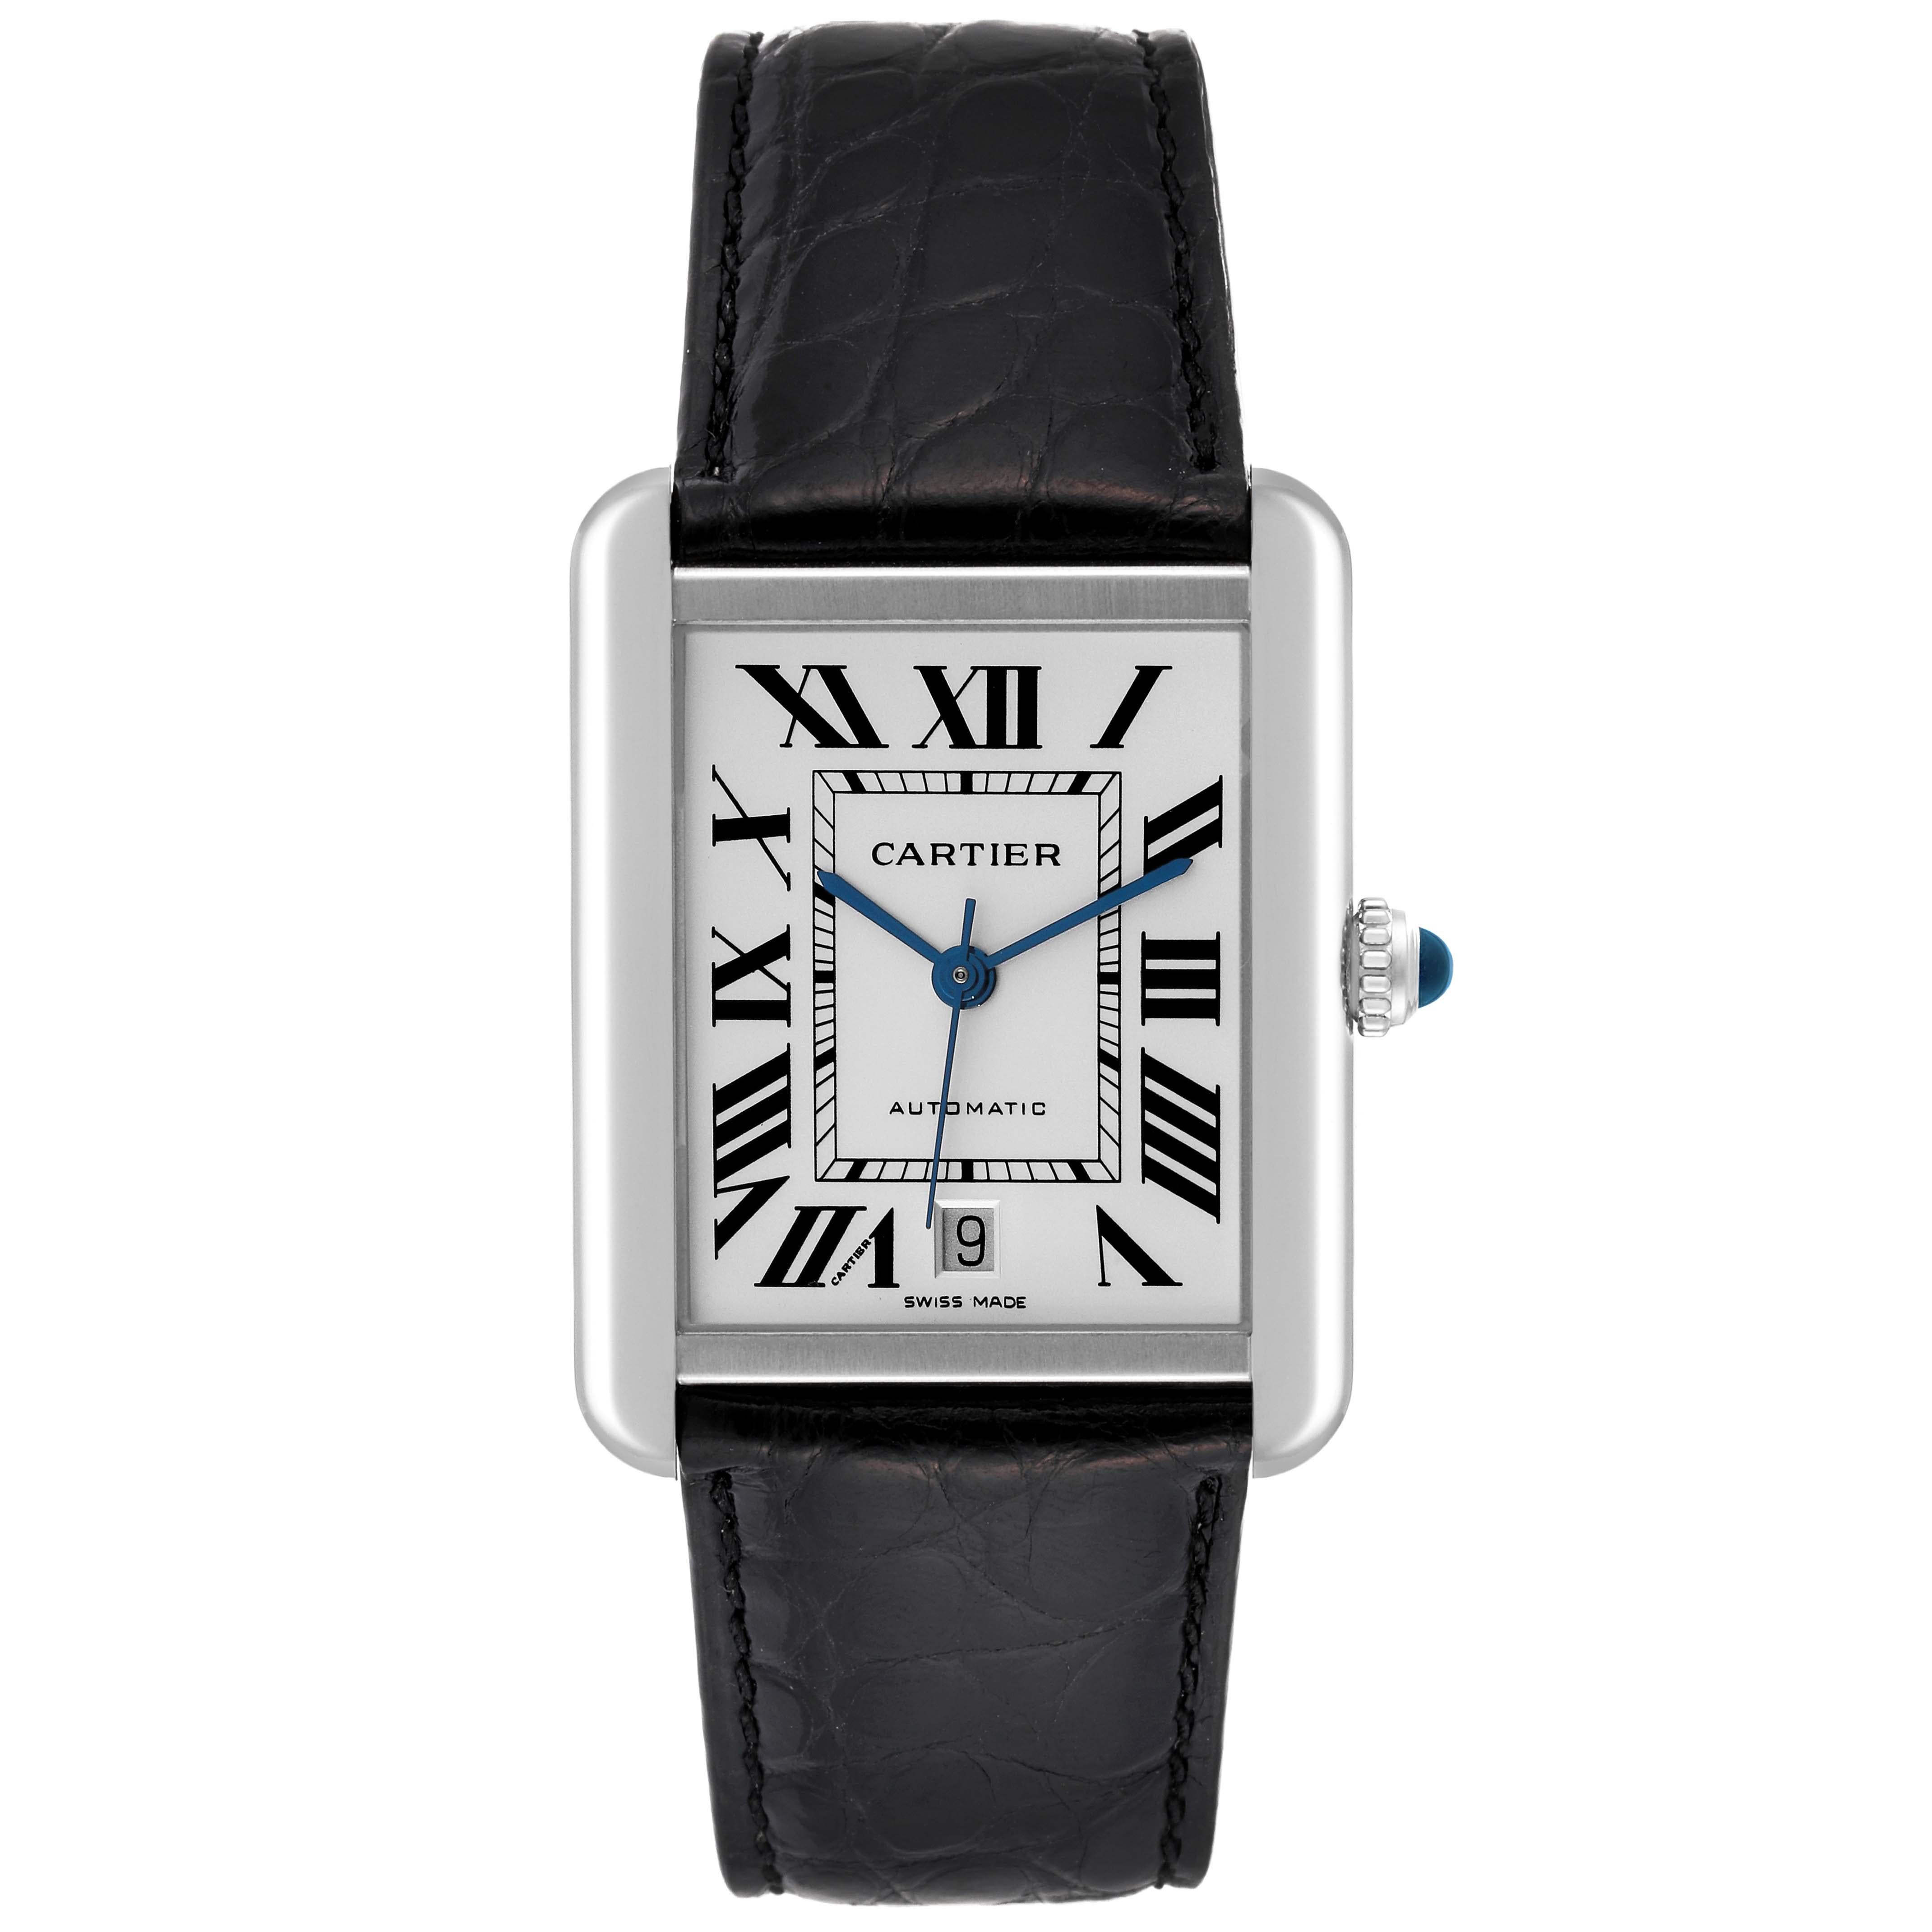 Cartier Tank Solo XL Automatic Silver Dial Steel Mens Watch W5200027. Automatic self-winding movement. Stainless steel case 31.0 x 40.85 mm. Circular grained crown set with the blue spinel cabochon. . Scratch resistant sapphire crystal. Silver